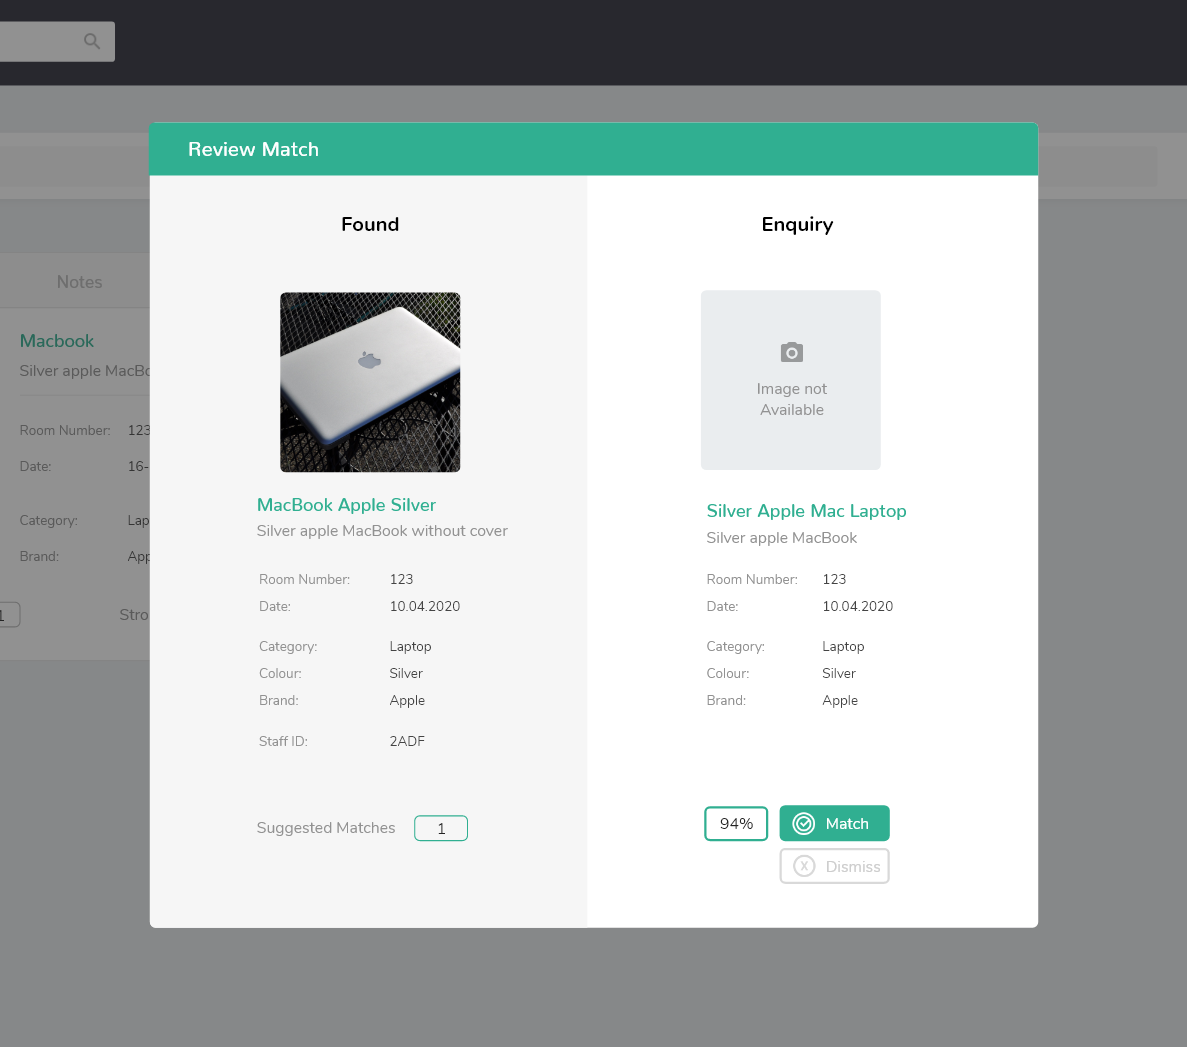 NotLost new matching engine on lost and found software platform